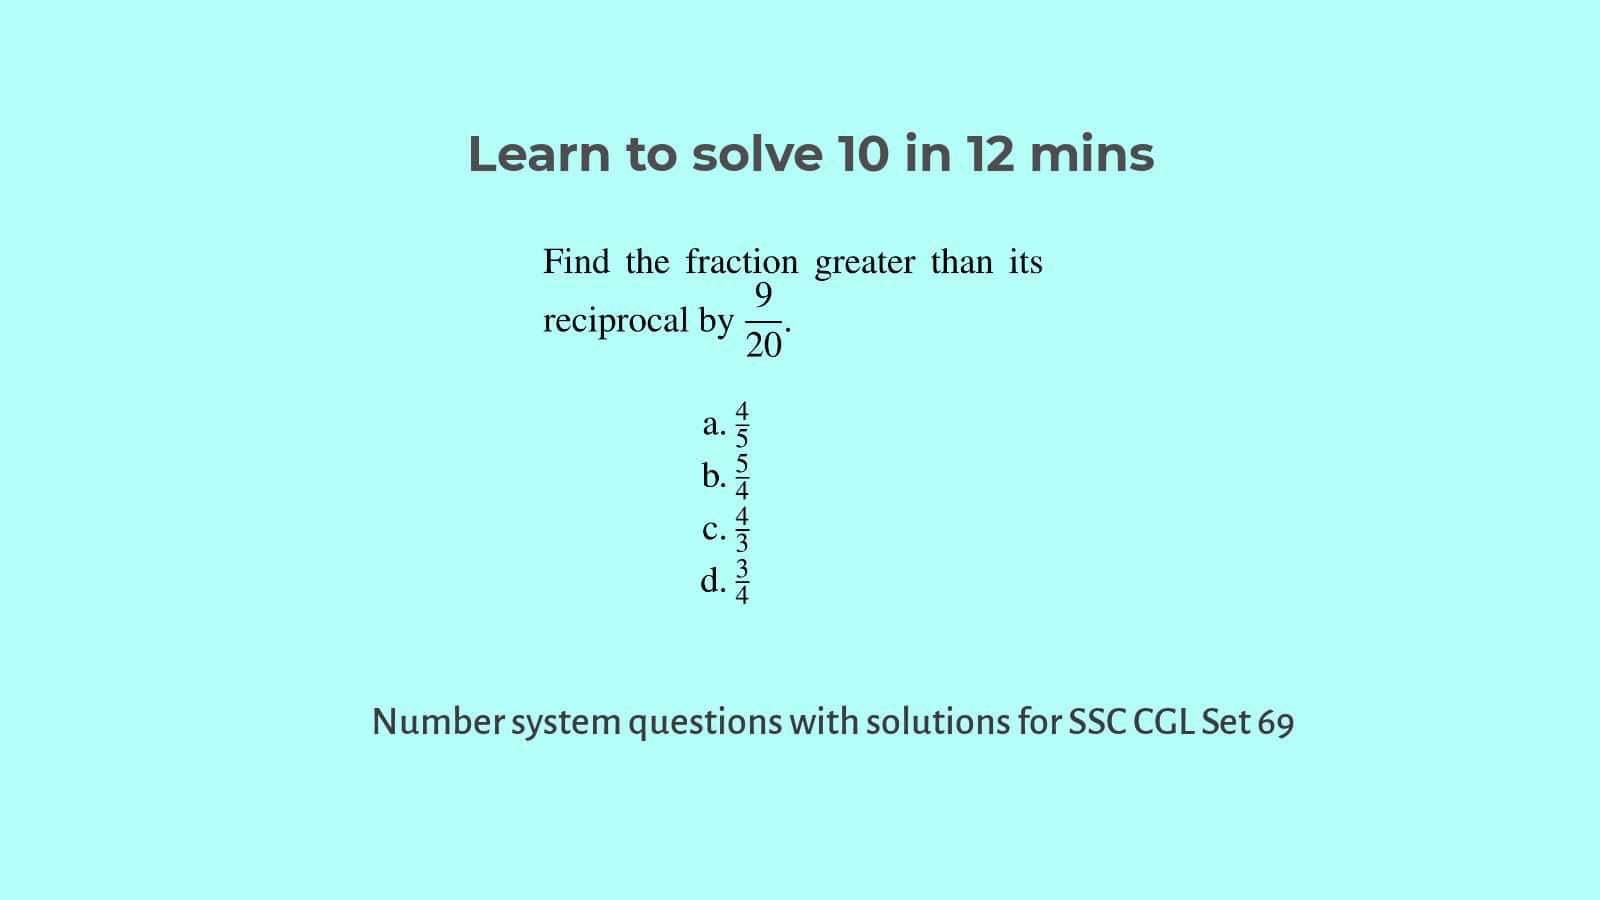 How to Solve Number System Questions Easy and Quick: SSC CGL 89